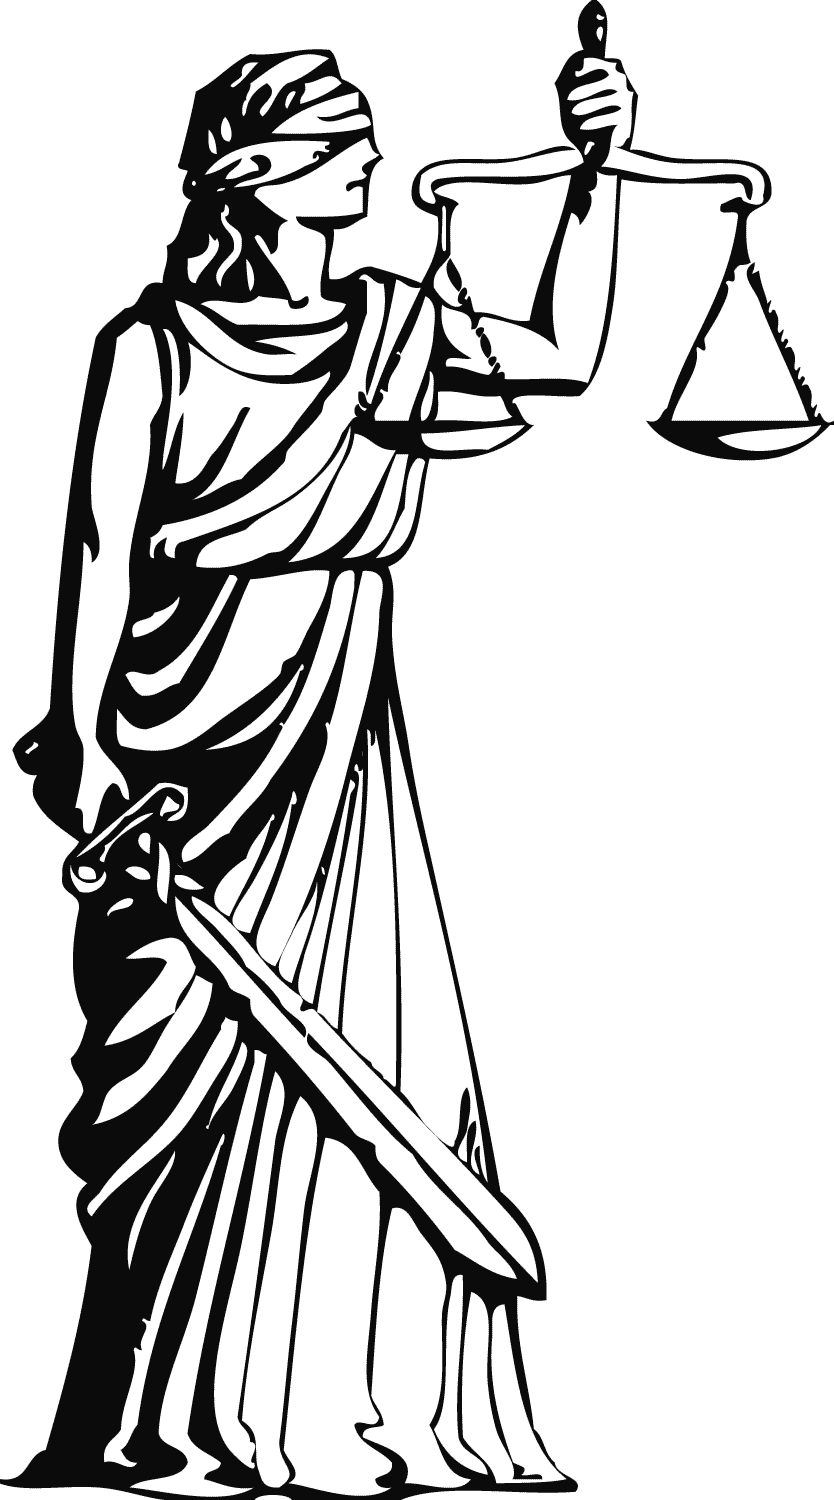 Why justice is not always blind – Constitutionally Speaking